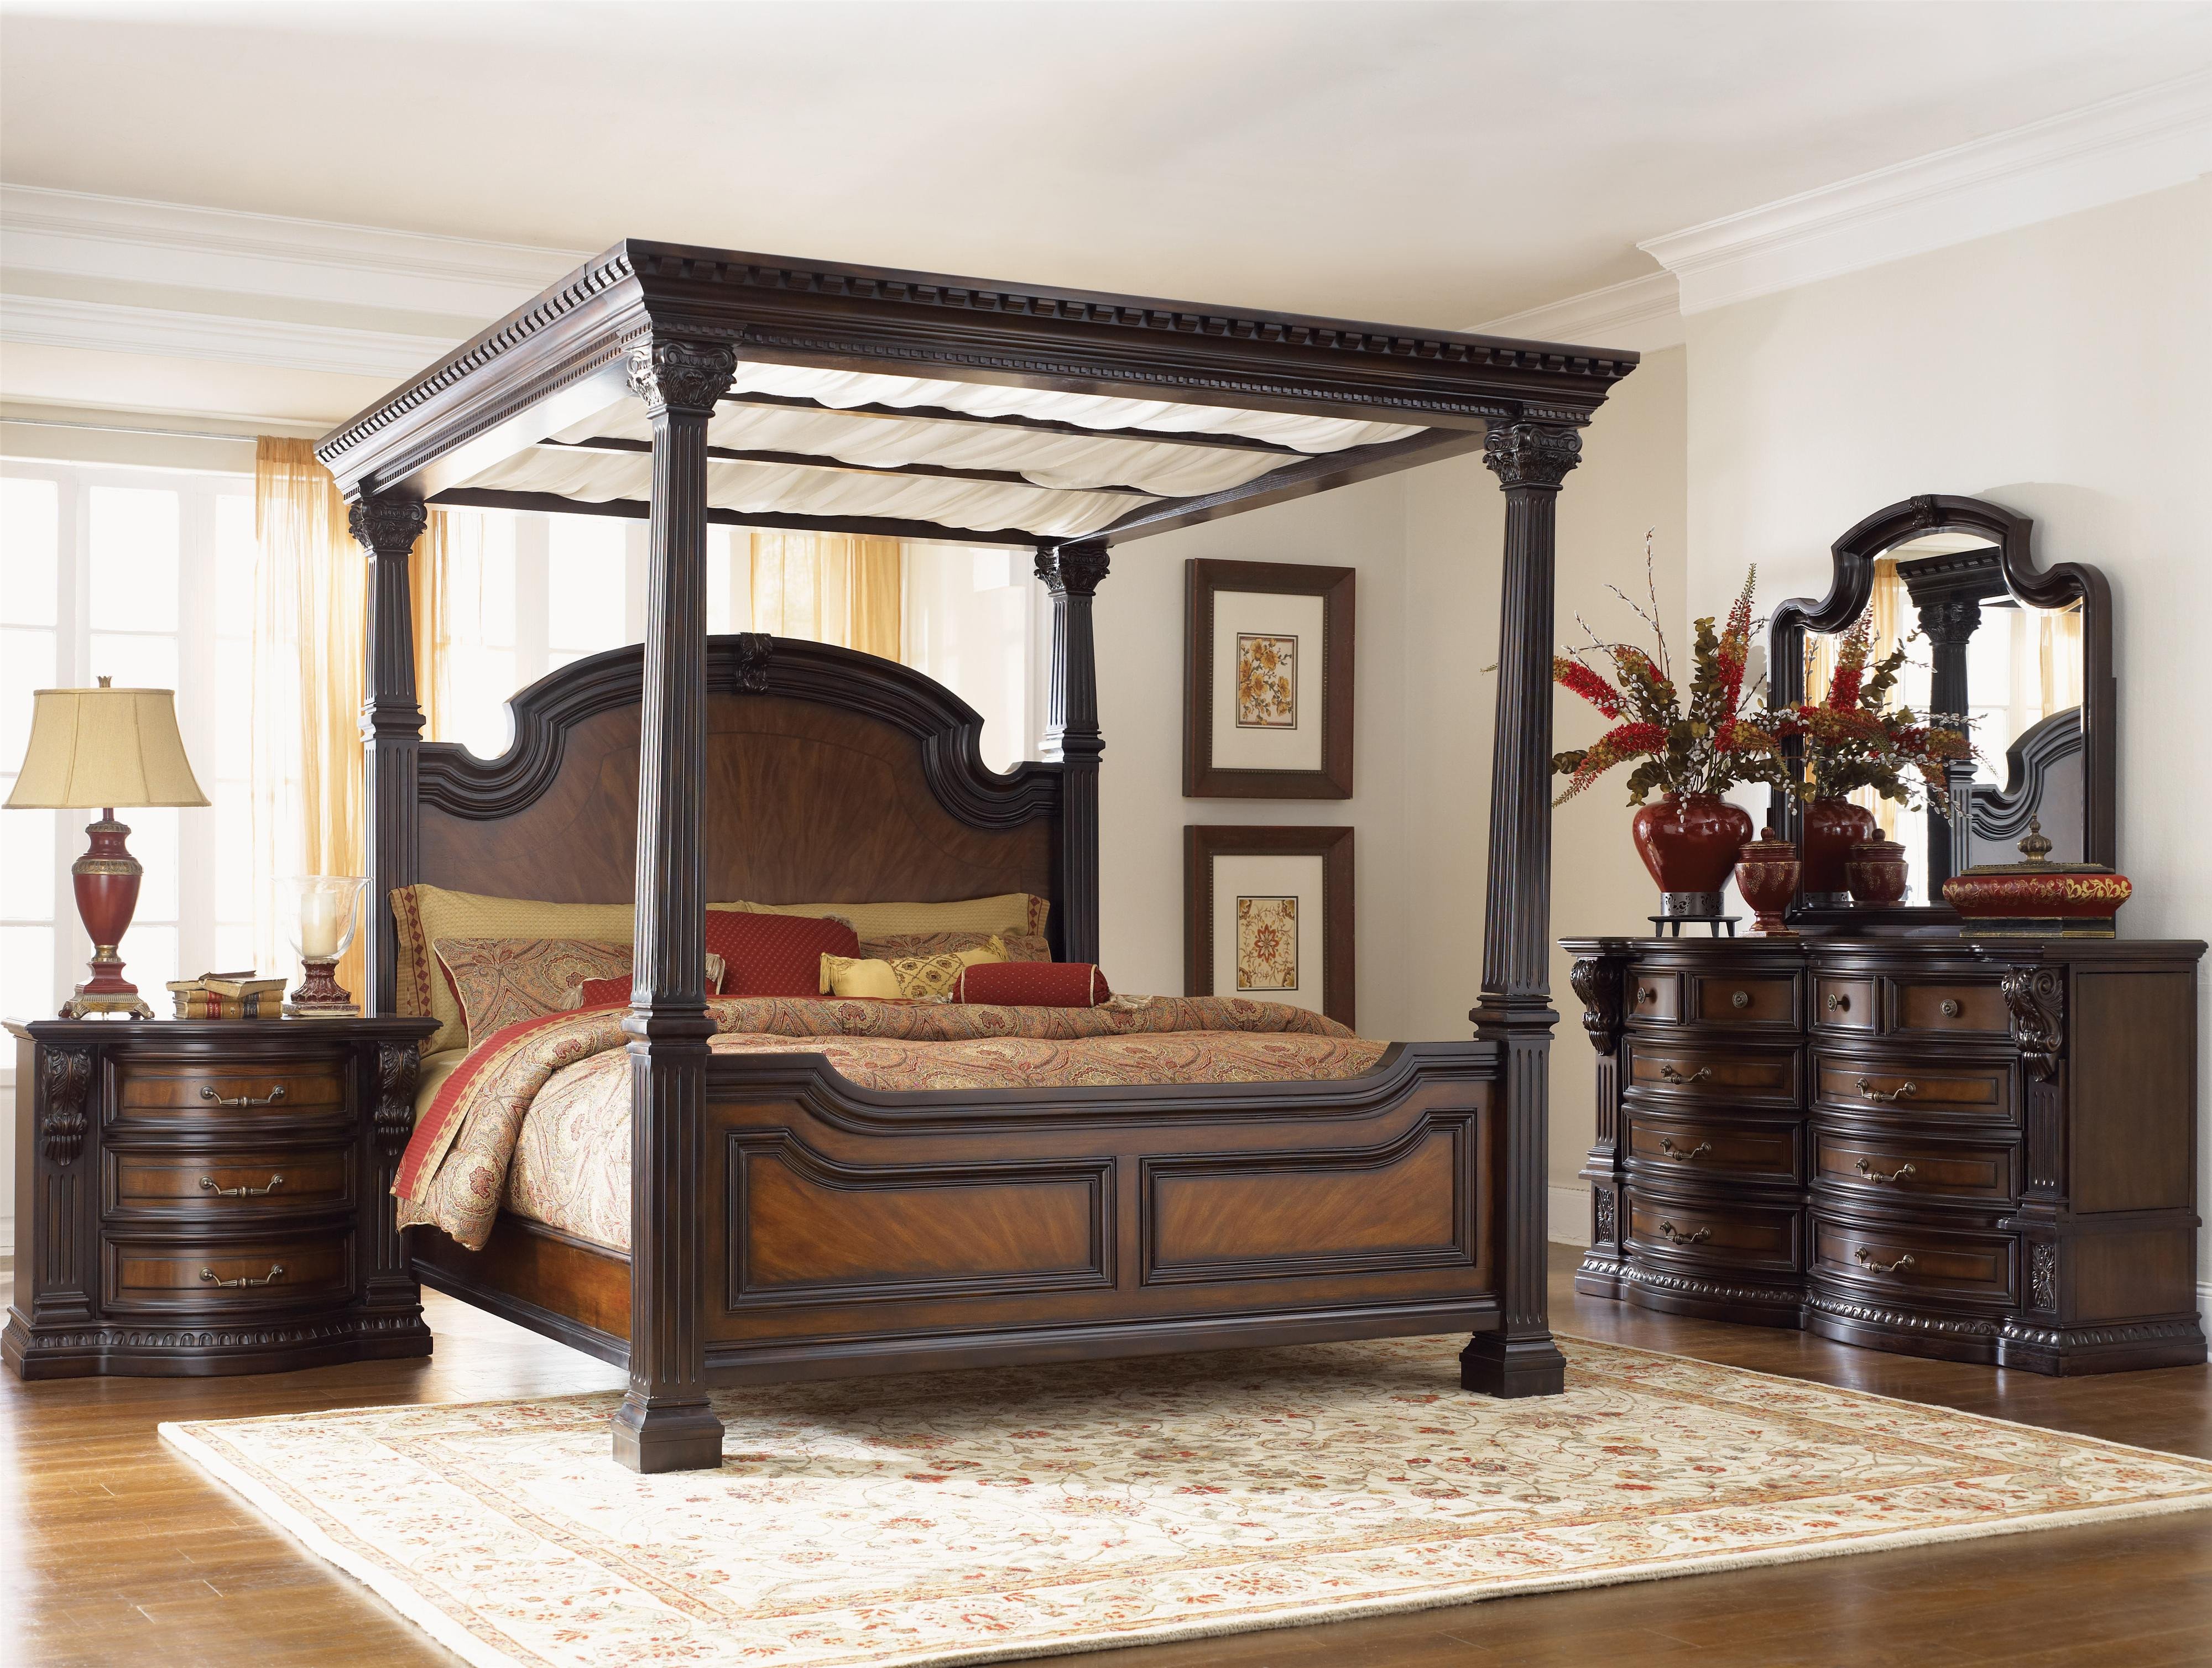 California King Size Bedroom Furniture Set Awesome Grand Estates 02 by Fairmont Designs Dream Home